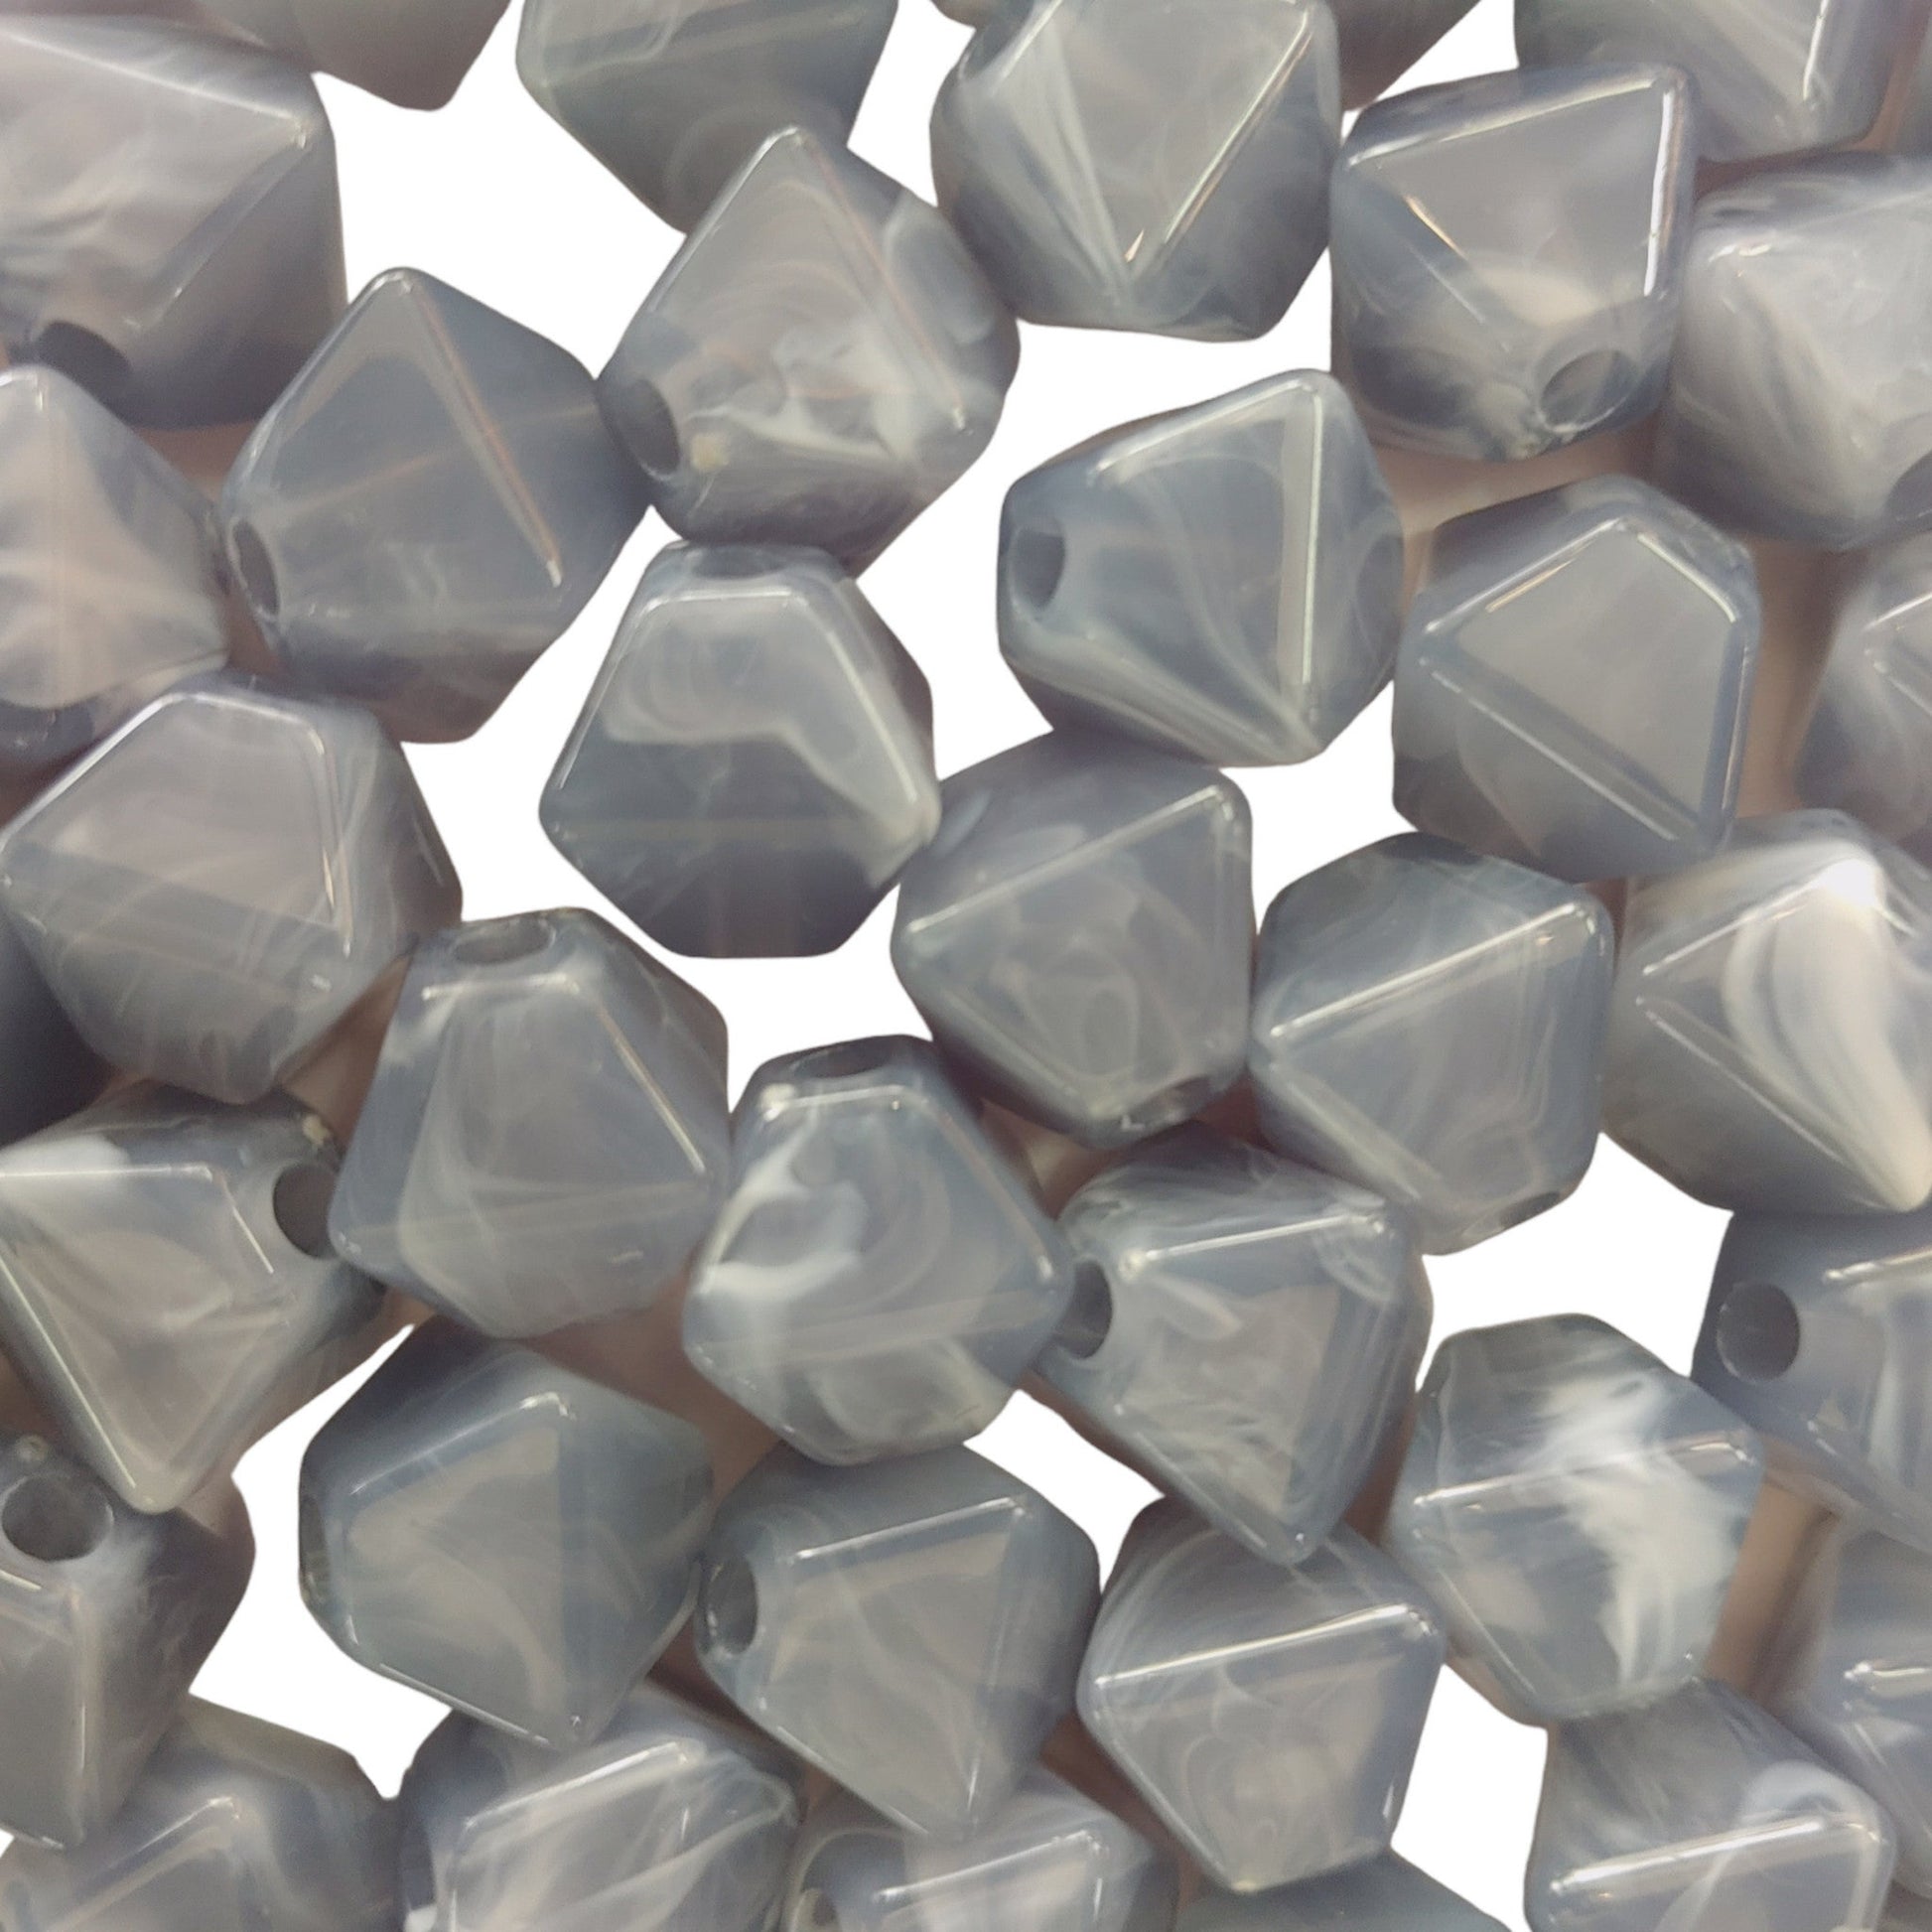 Indian Petals Square Shaped Resin Color Marble Beads Ideal for Jewelry designing and Craft Making or Decor